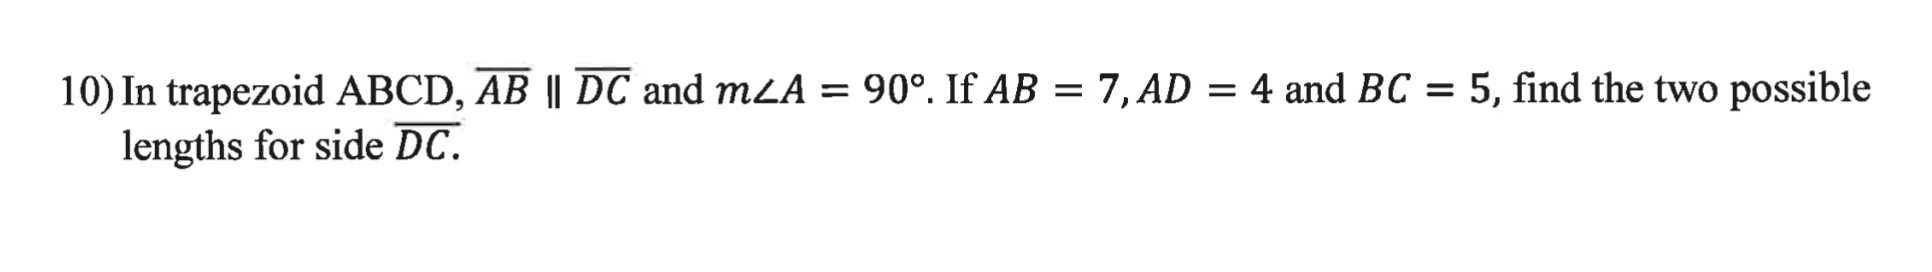 10) In trapezoid ABCD, AB || DC and mLA = 90°. If AB = 7, AD = 4 and BC = 5, find the two possible
lengths for side DC.
